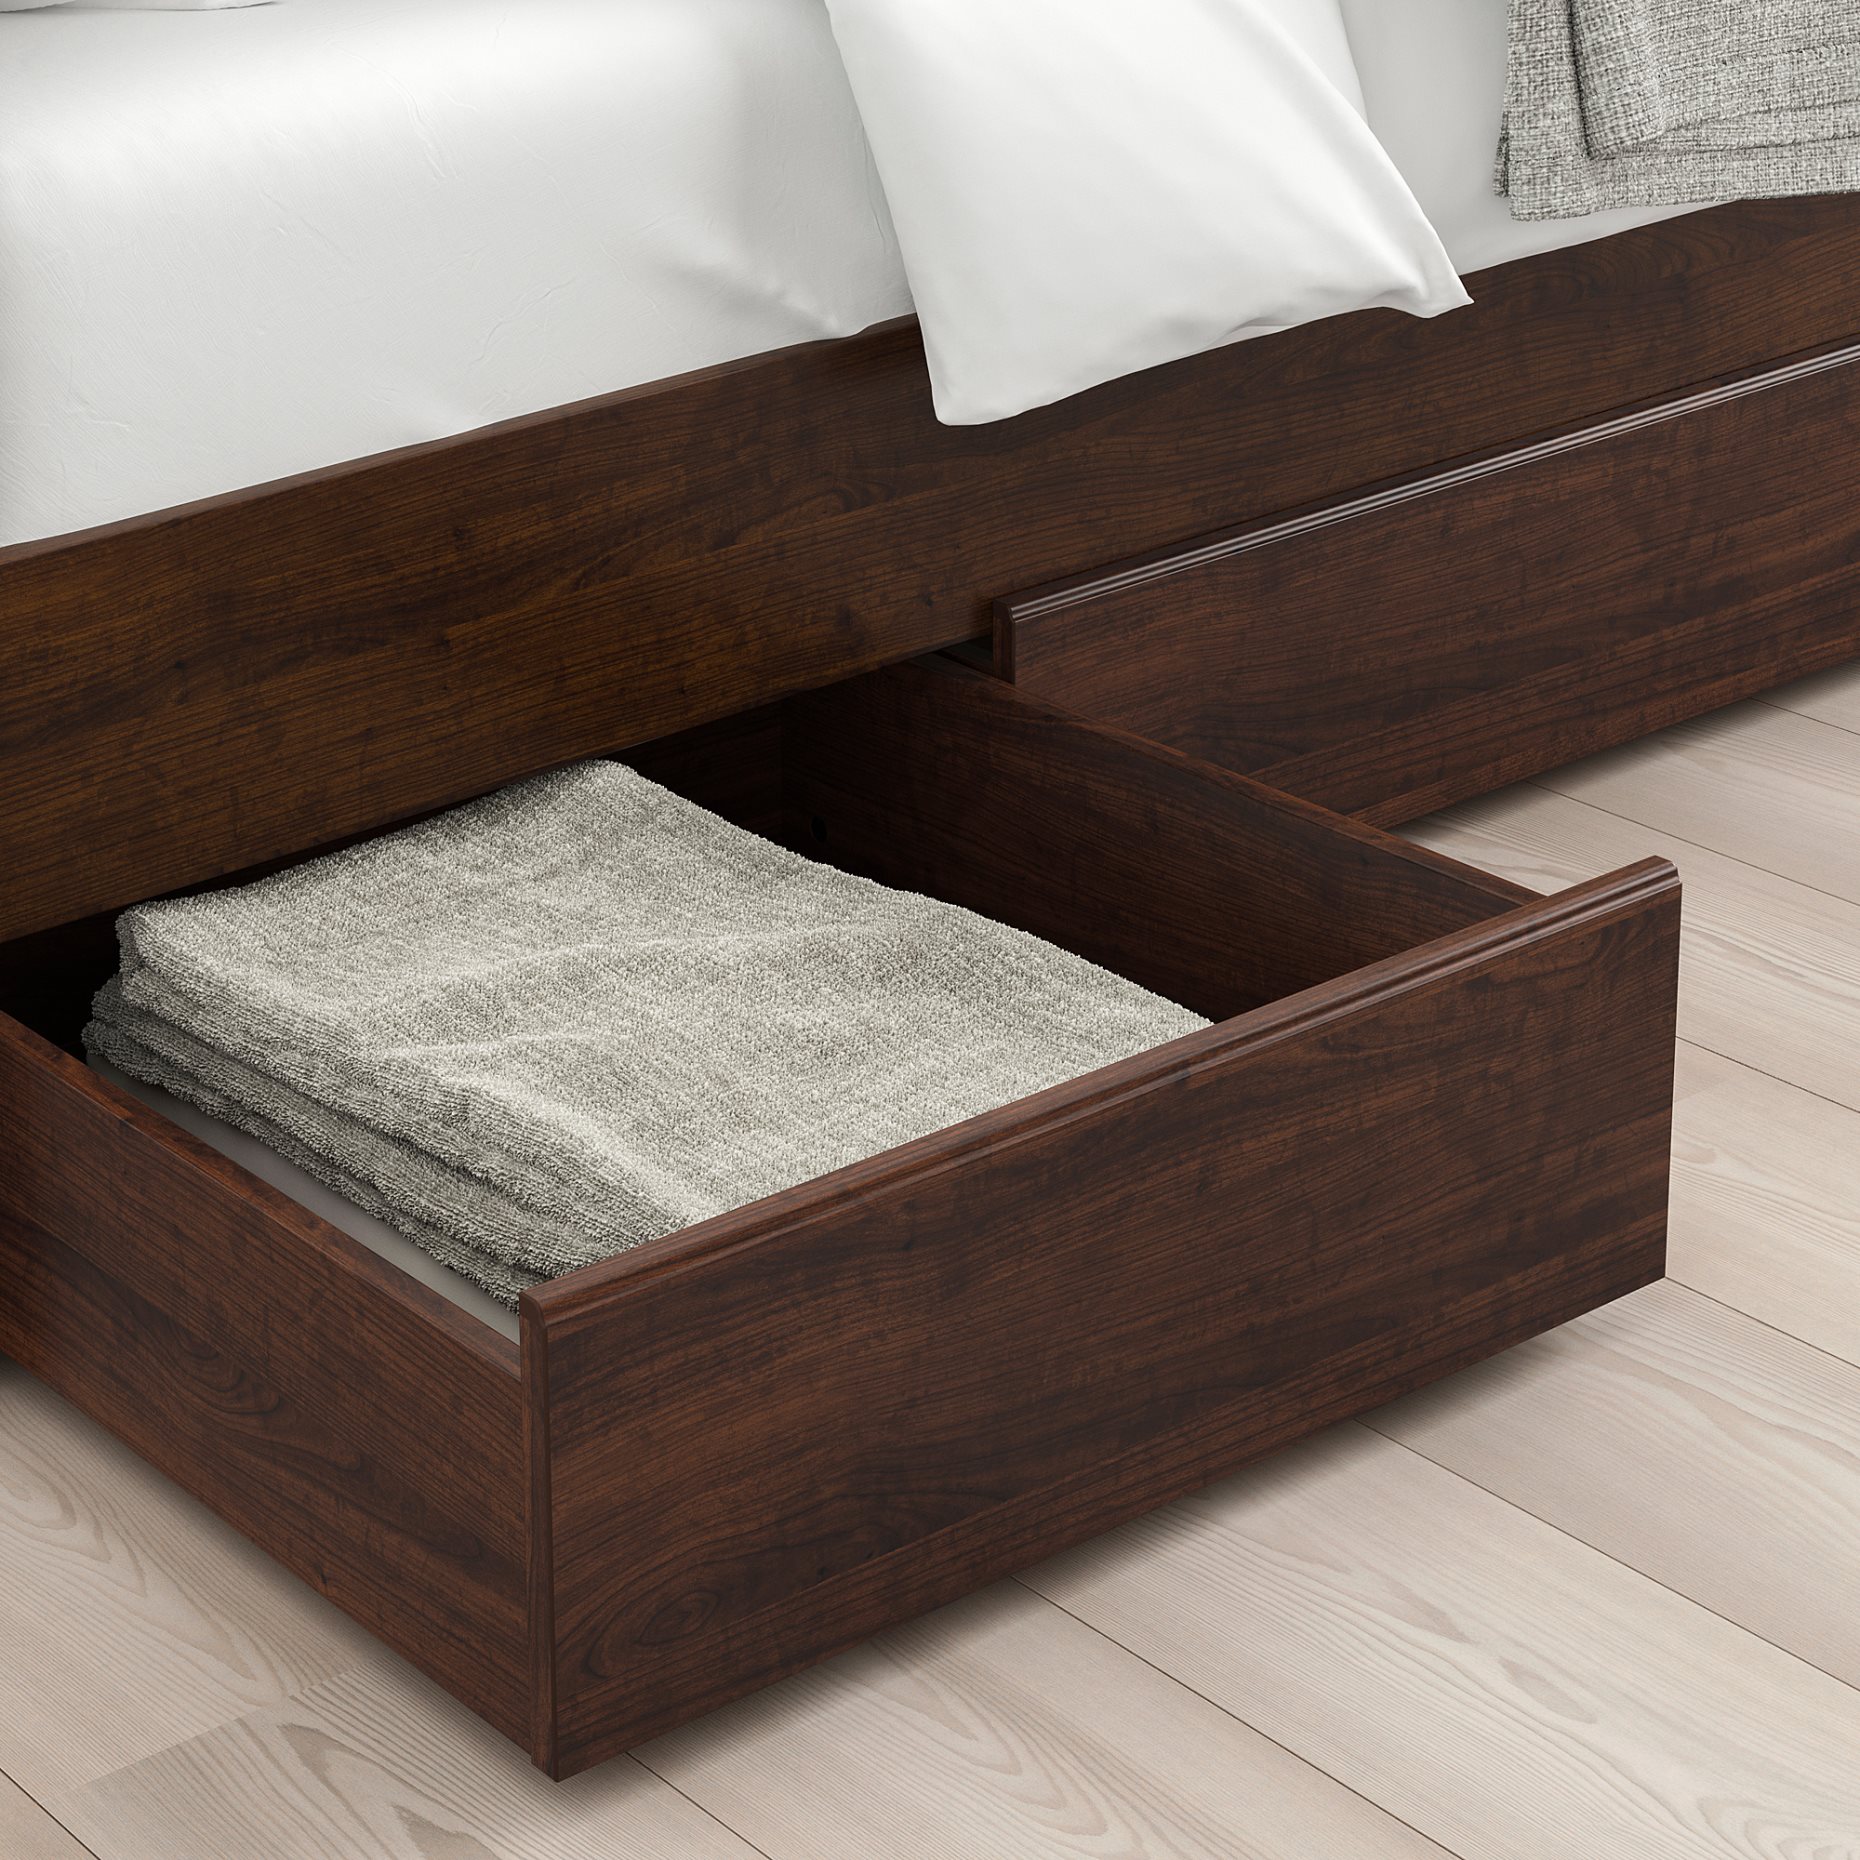 SONGESAND, bed frame with 4 storage boxes, 160X200 cm, 392.411.69